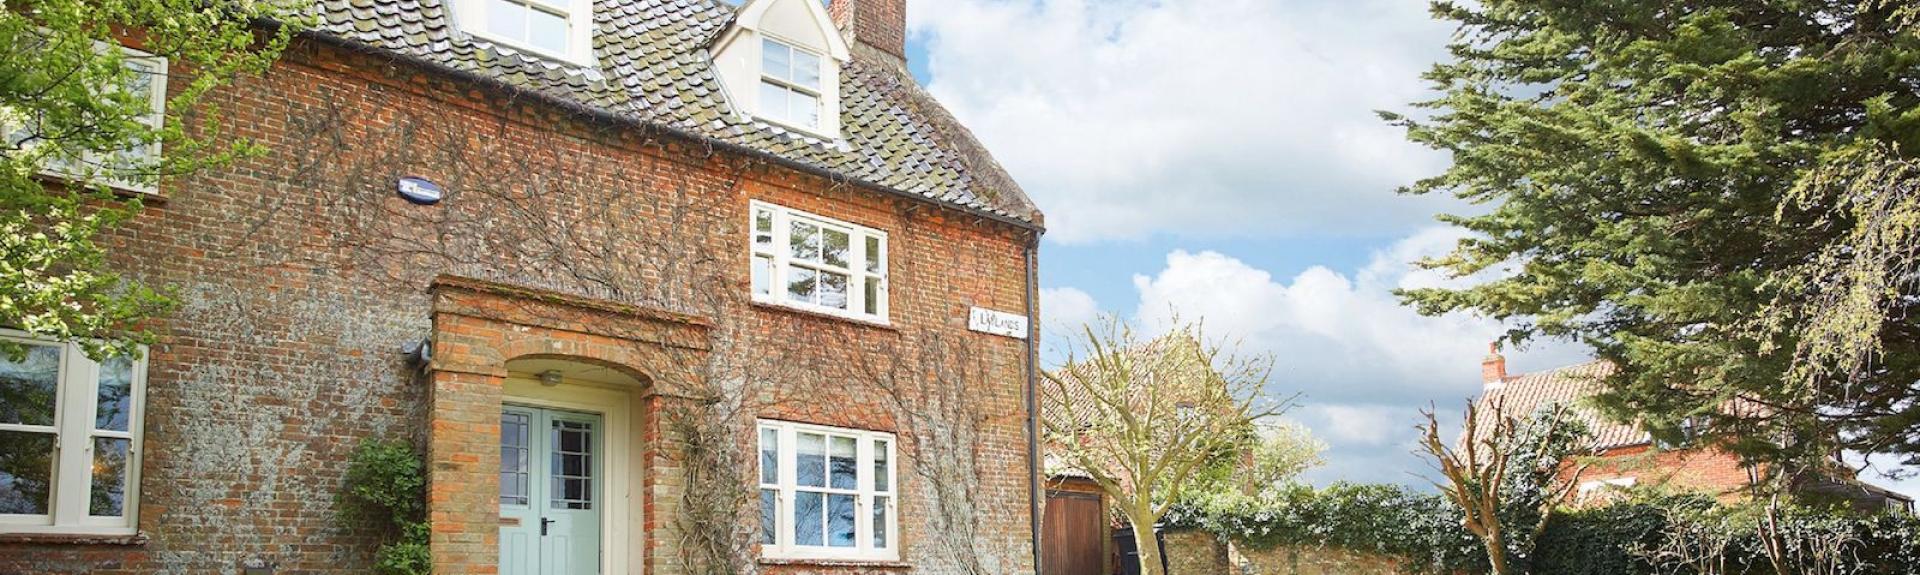 Exterior or an old 3-storey country cottage in Norfolk overlooking a large lawn bordered by mature trees.